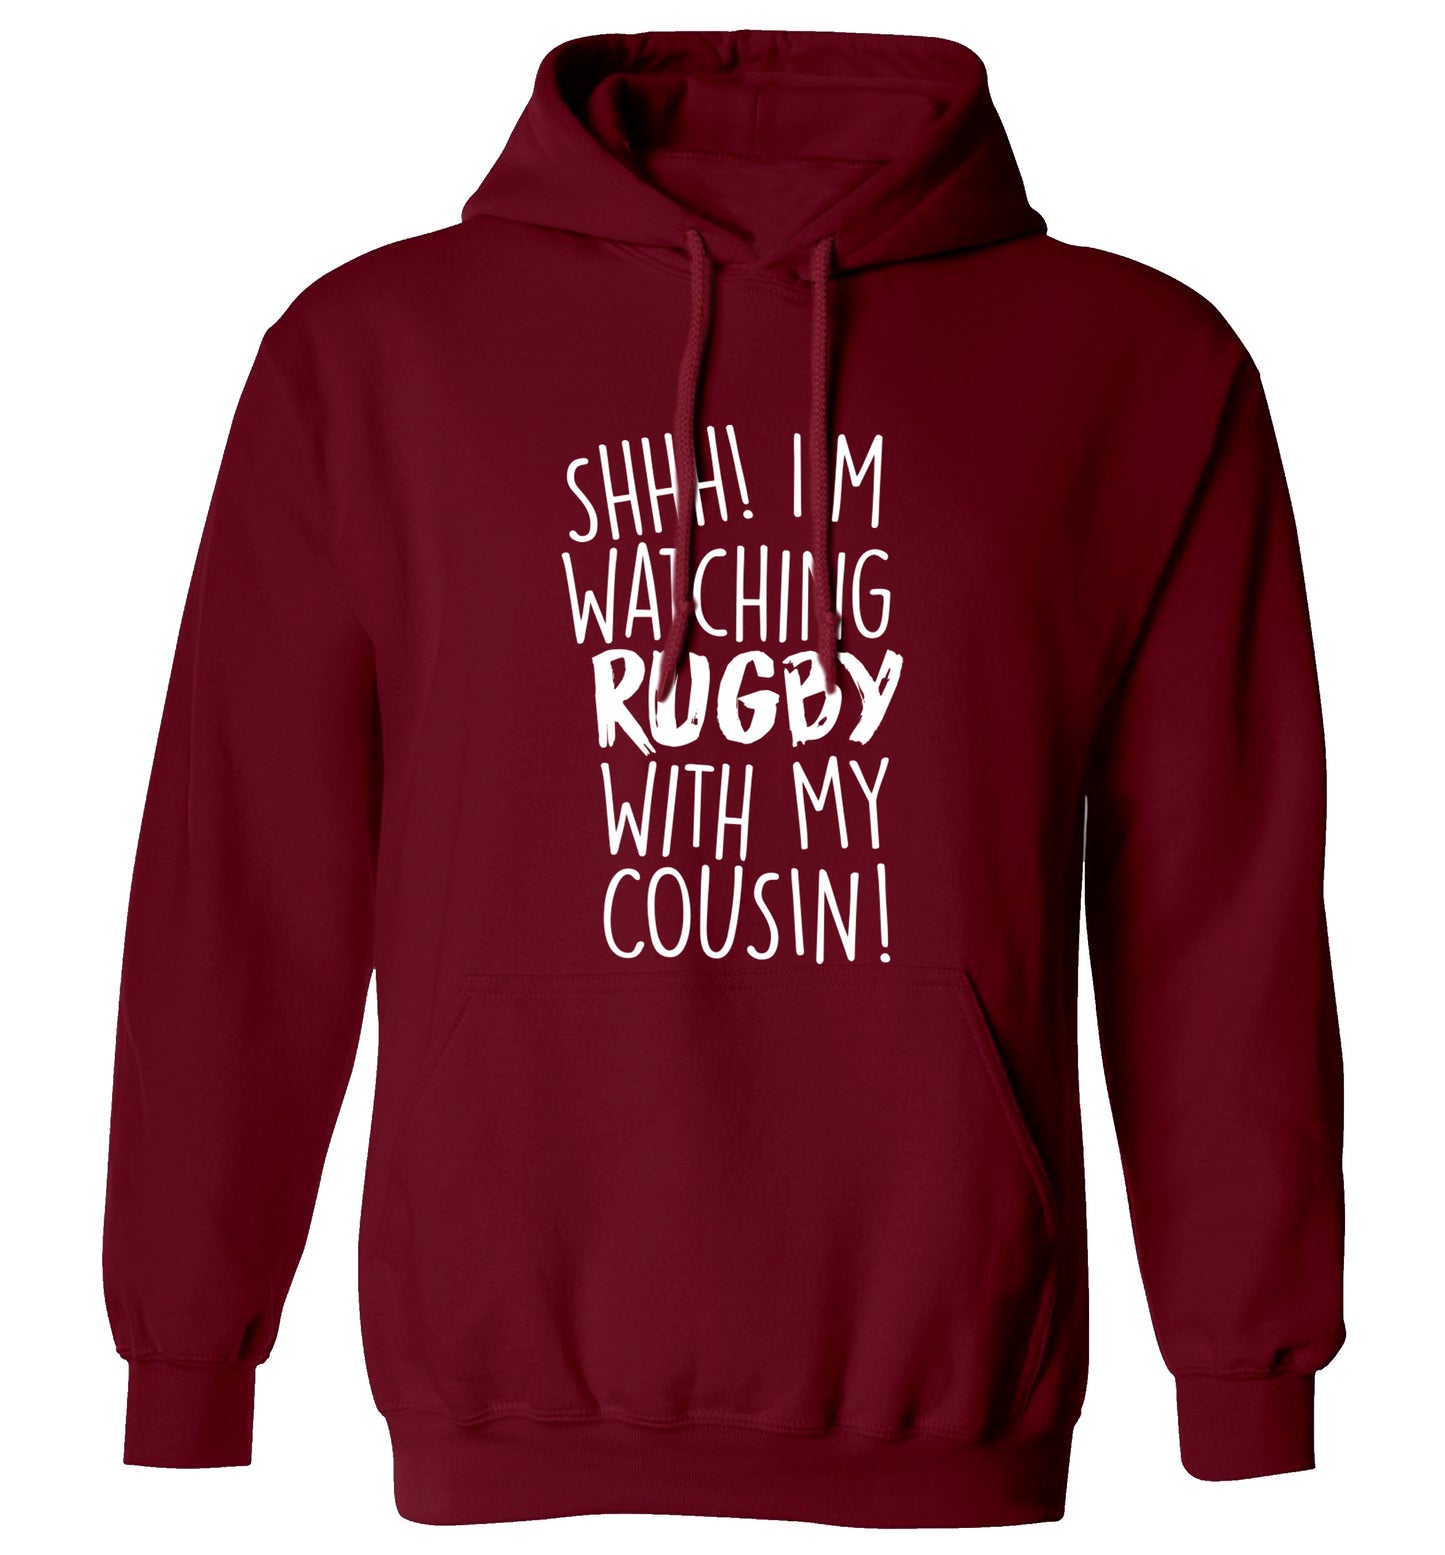 Shhh I'm watching rugby with my cousin adults unisex maroon hoodie 2XL